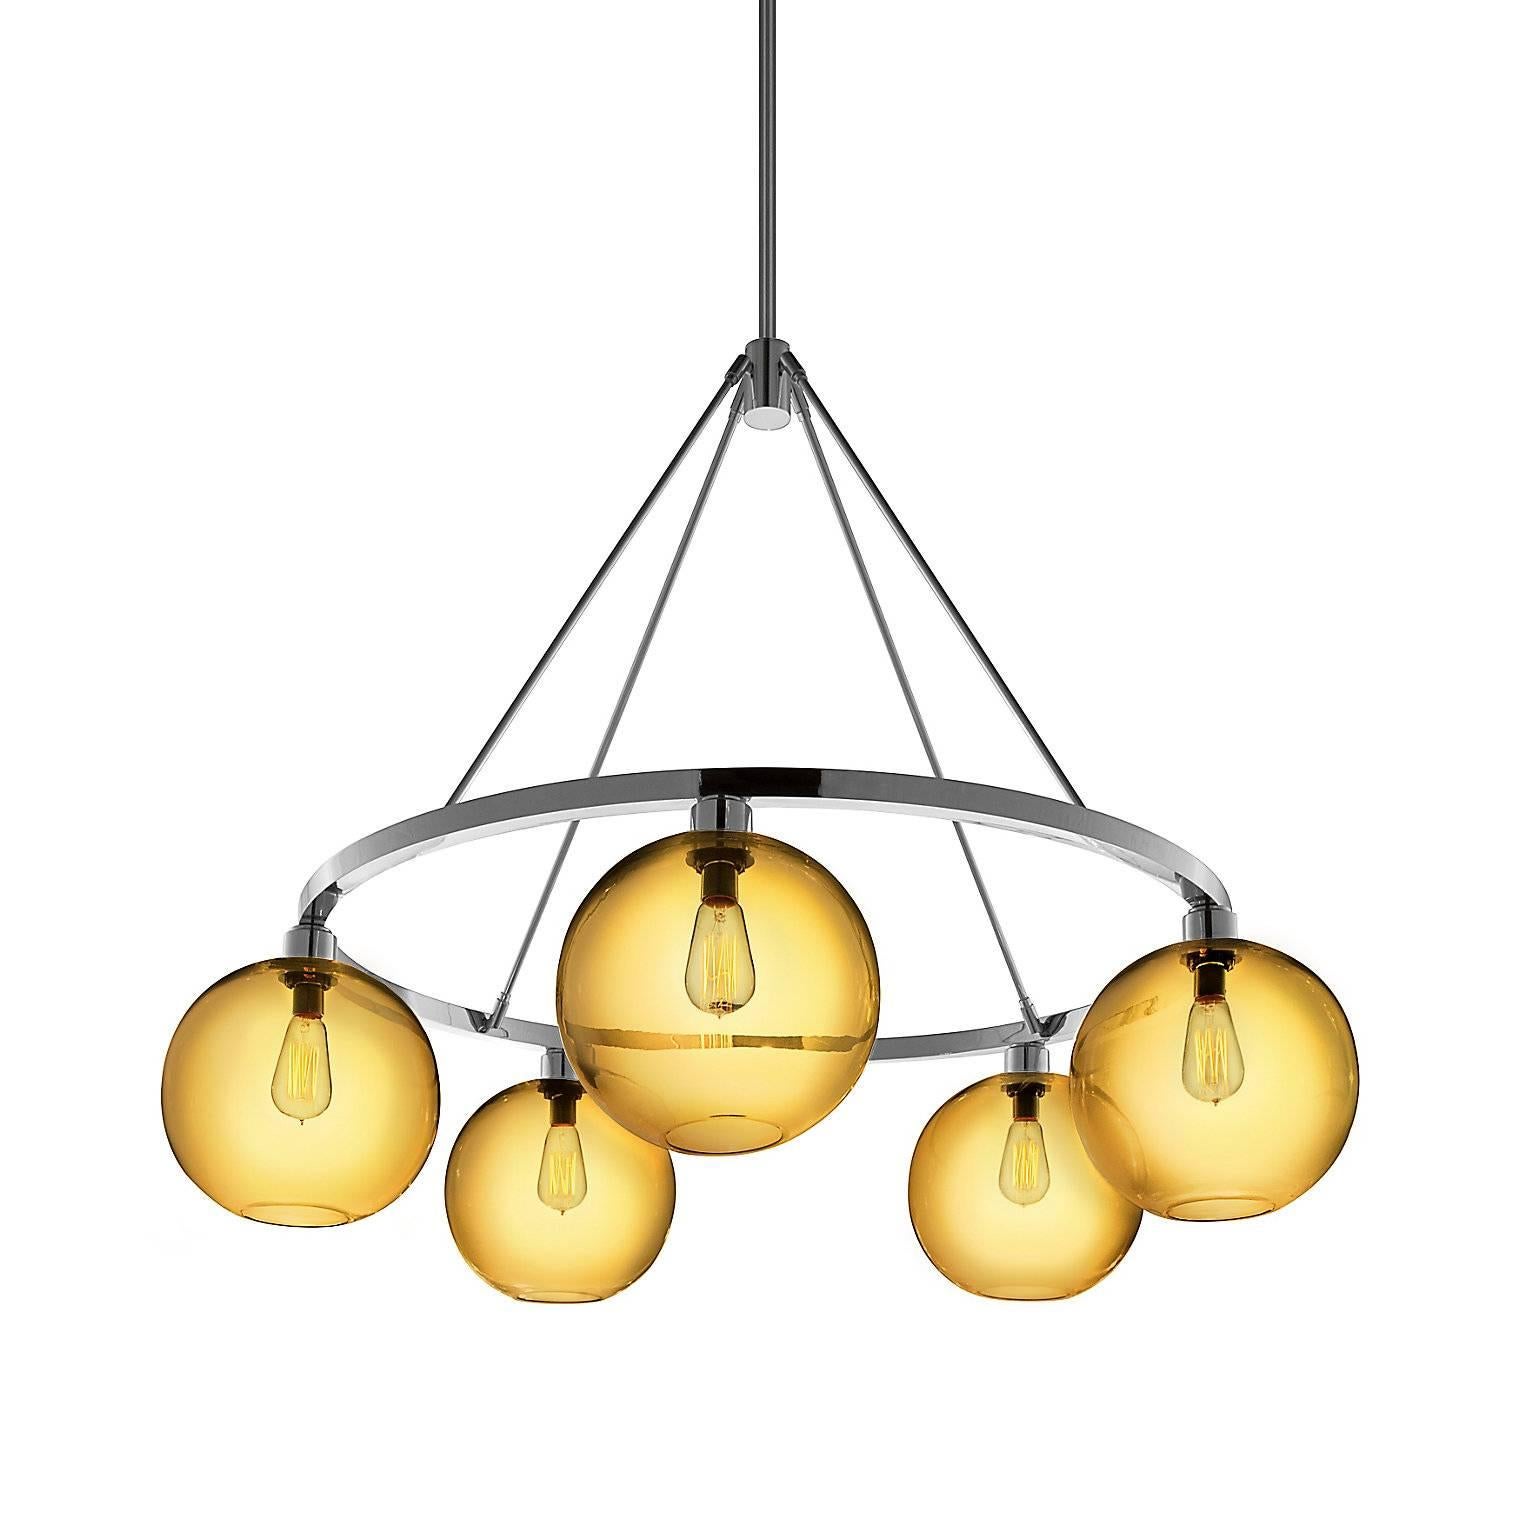 Imbued with timeless style, the striking solitaire chandelier showcases sophisticated metal finishes, a classic, handcrafted Silhouette, and the soft glow of the edison bulb at its center. Every single glass light that comes from Niche is handblown